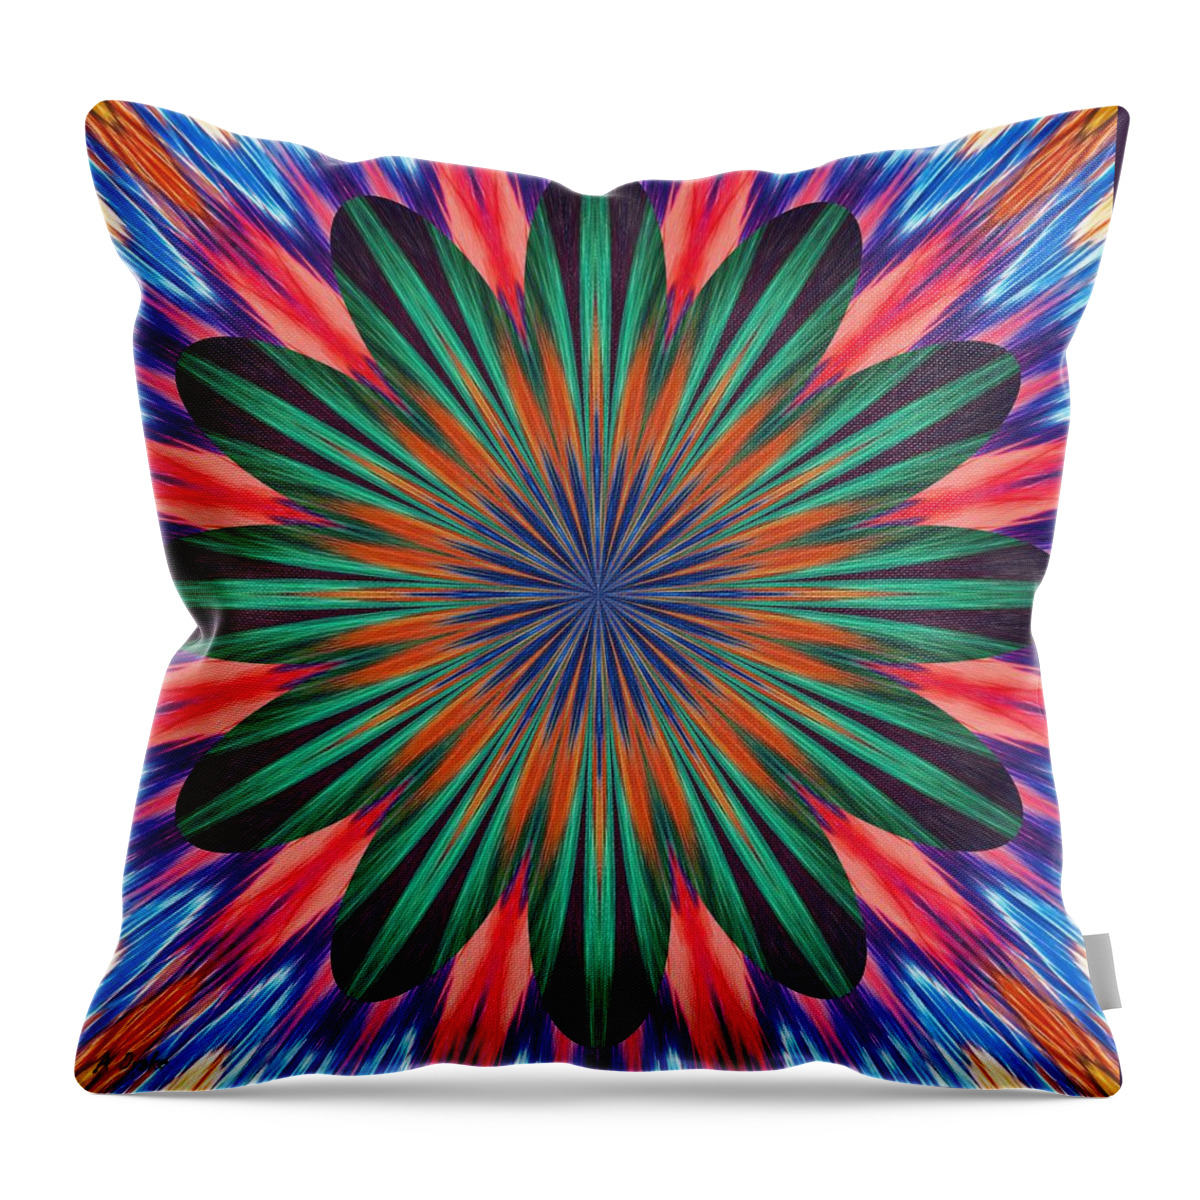 Passion Throw Pillow featuring the digital art Passion Flower On Venus by Alec Drake